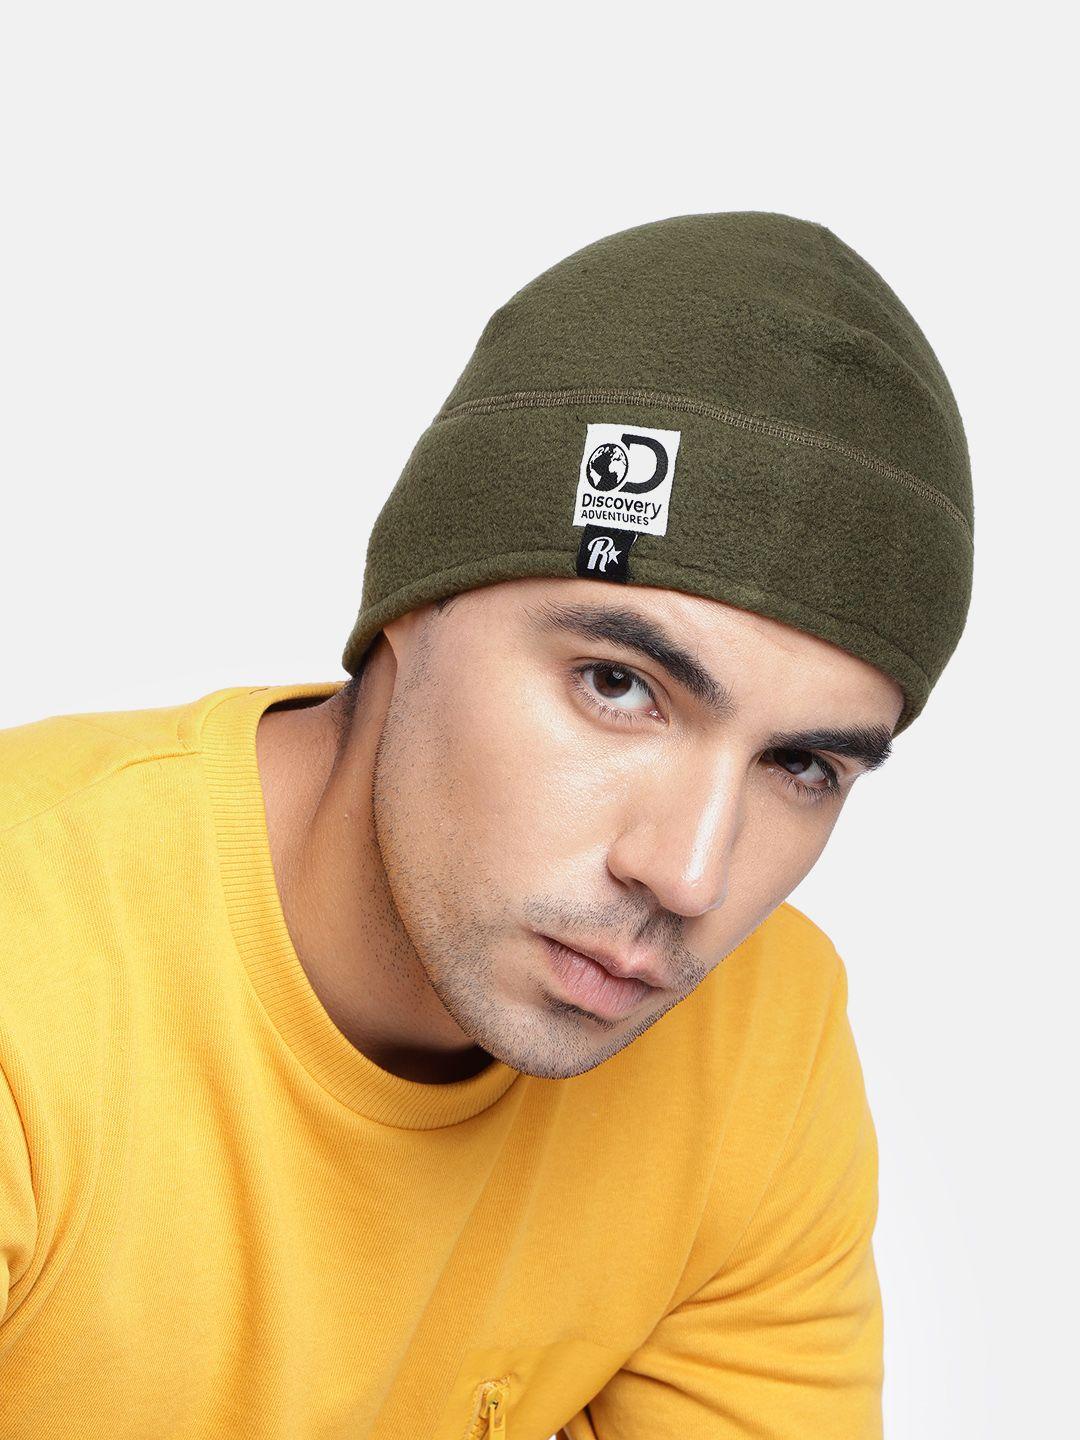 roadster x discovery adventures unisex olive green acrylic beanie